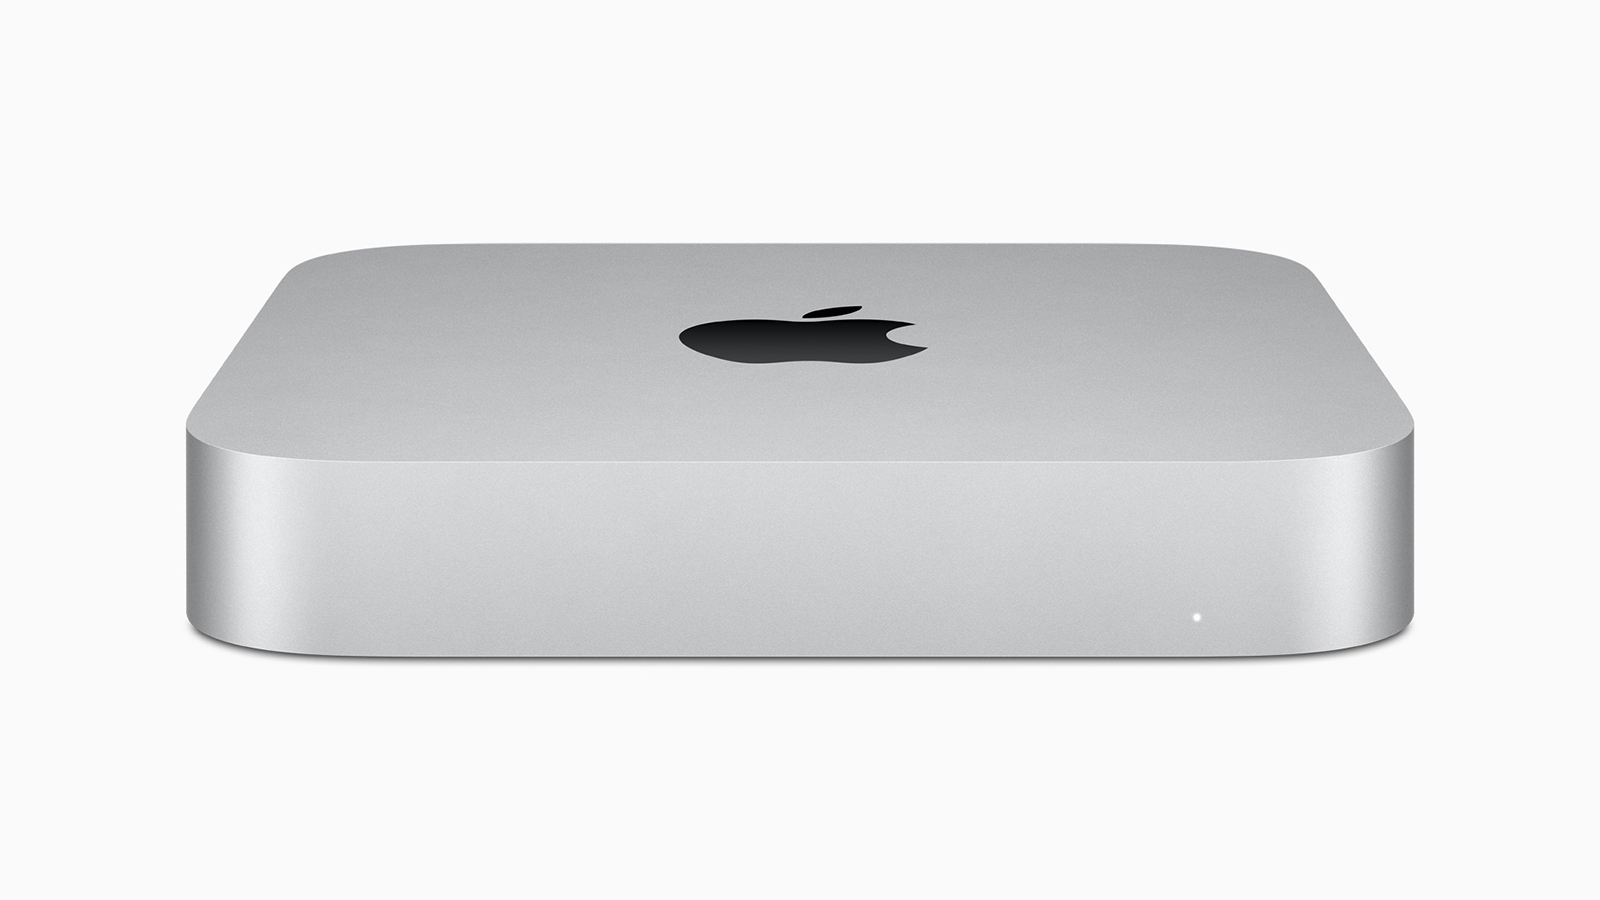 The NewlyReleased Mac mini Is More Powerful But Less Expensive Than